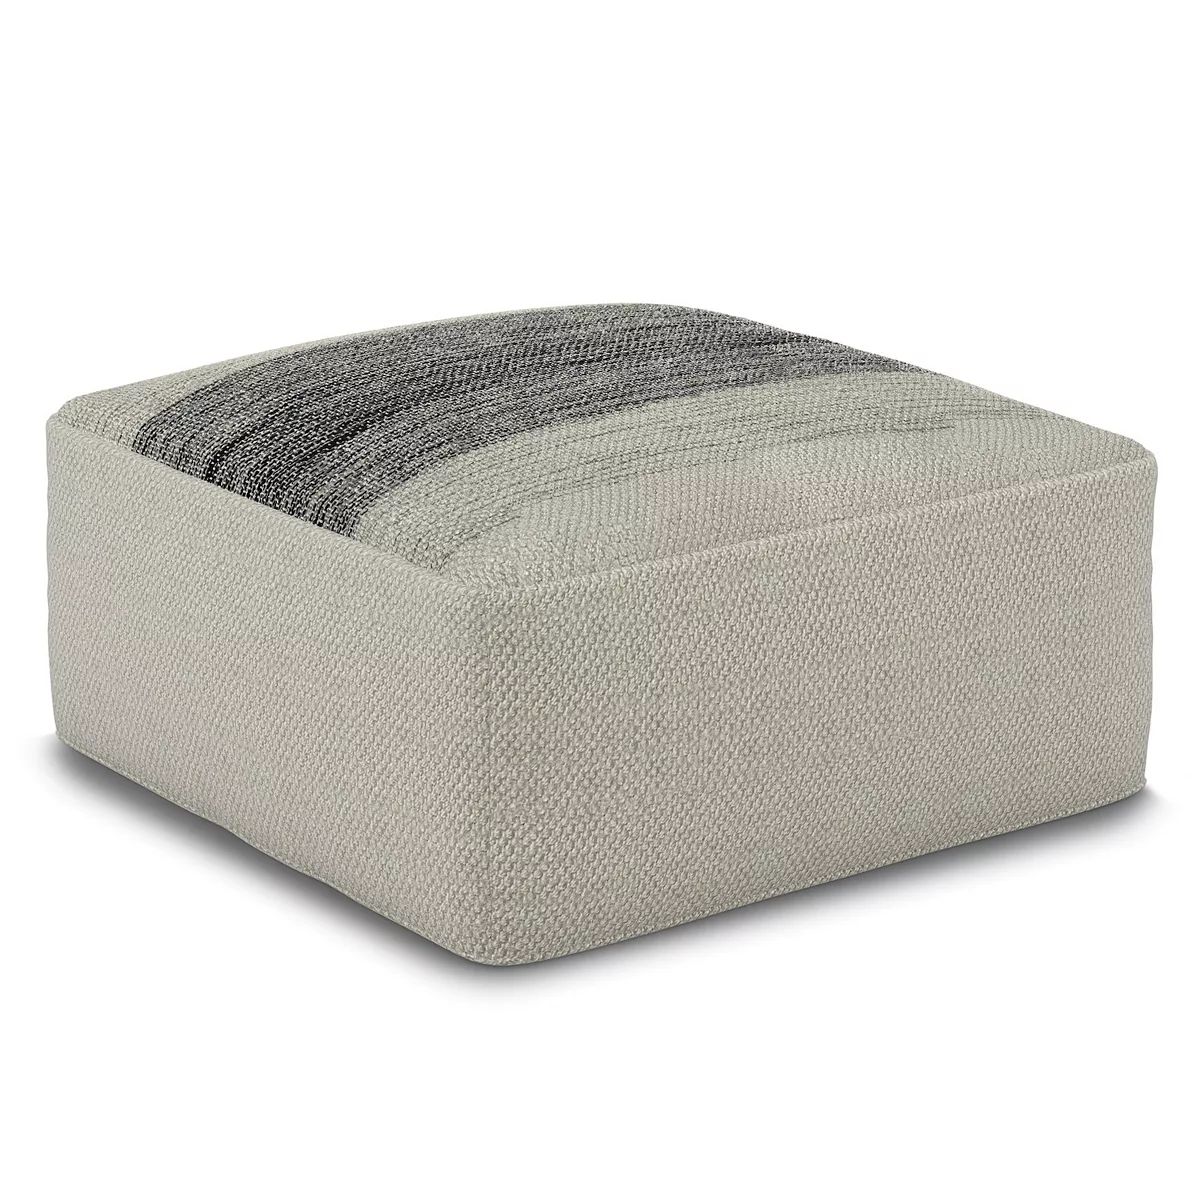 Simpli Home Sabella Square Woven Indoor / Outdoor Pouf | Kohl's